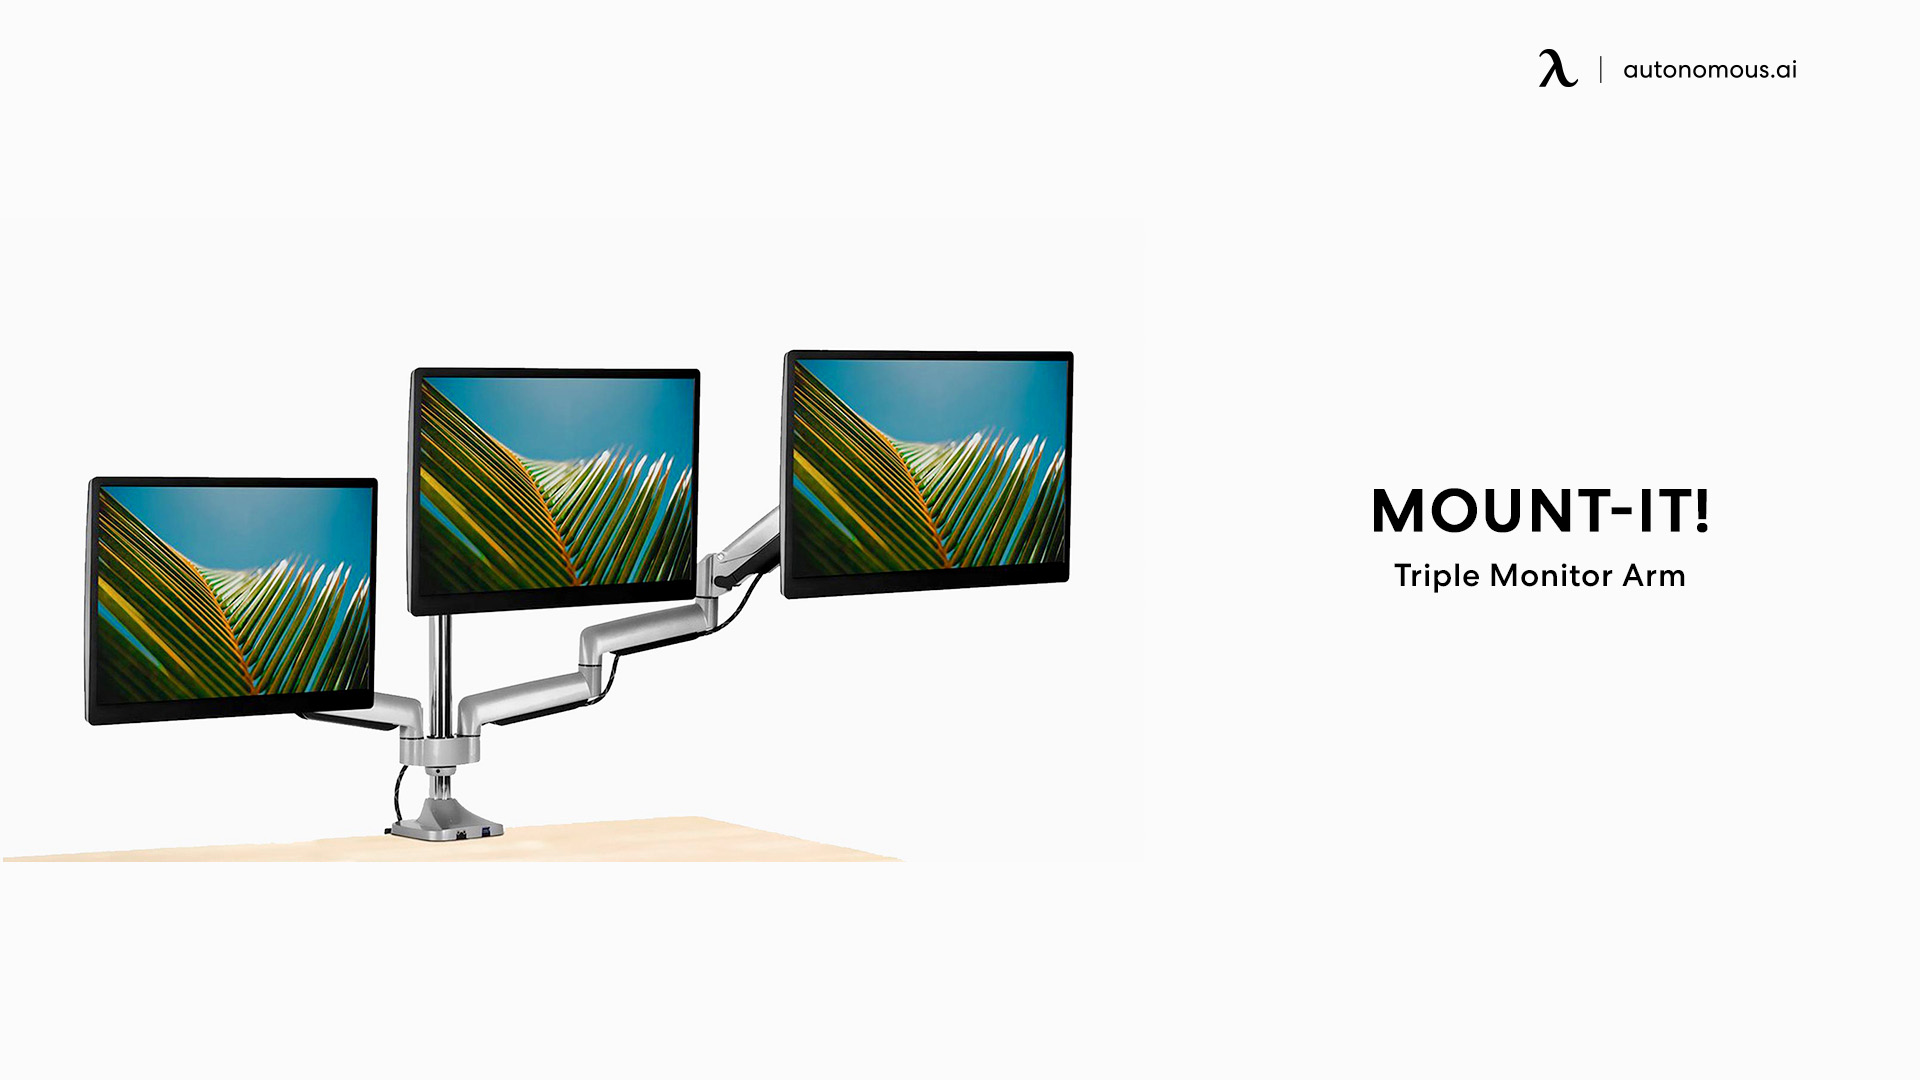 Triple Monitor Arm by Mount-It! computer accessories